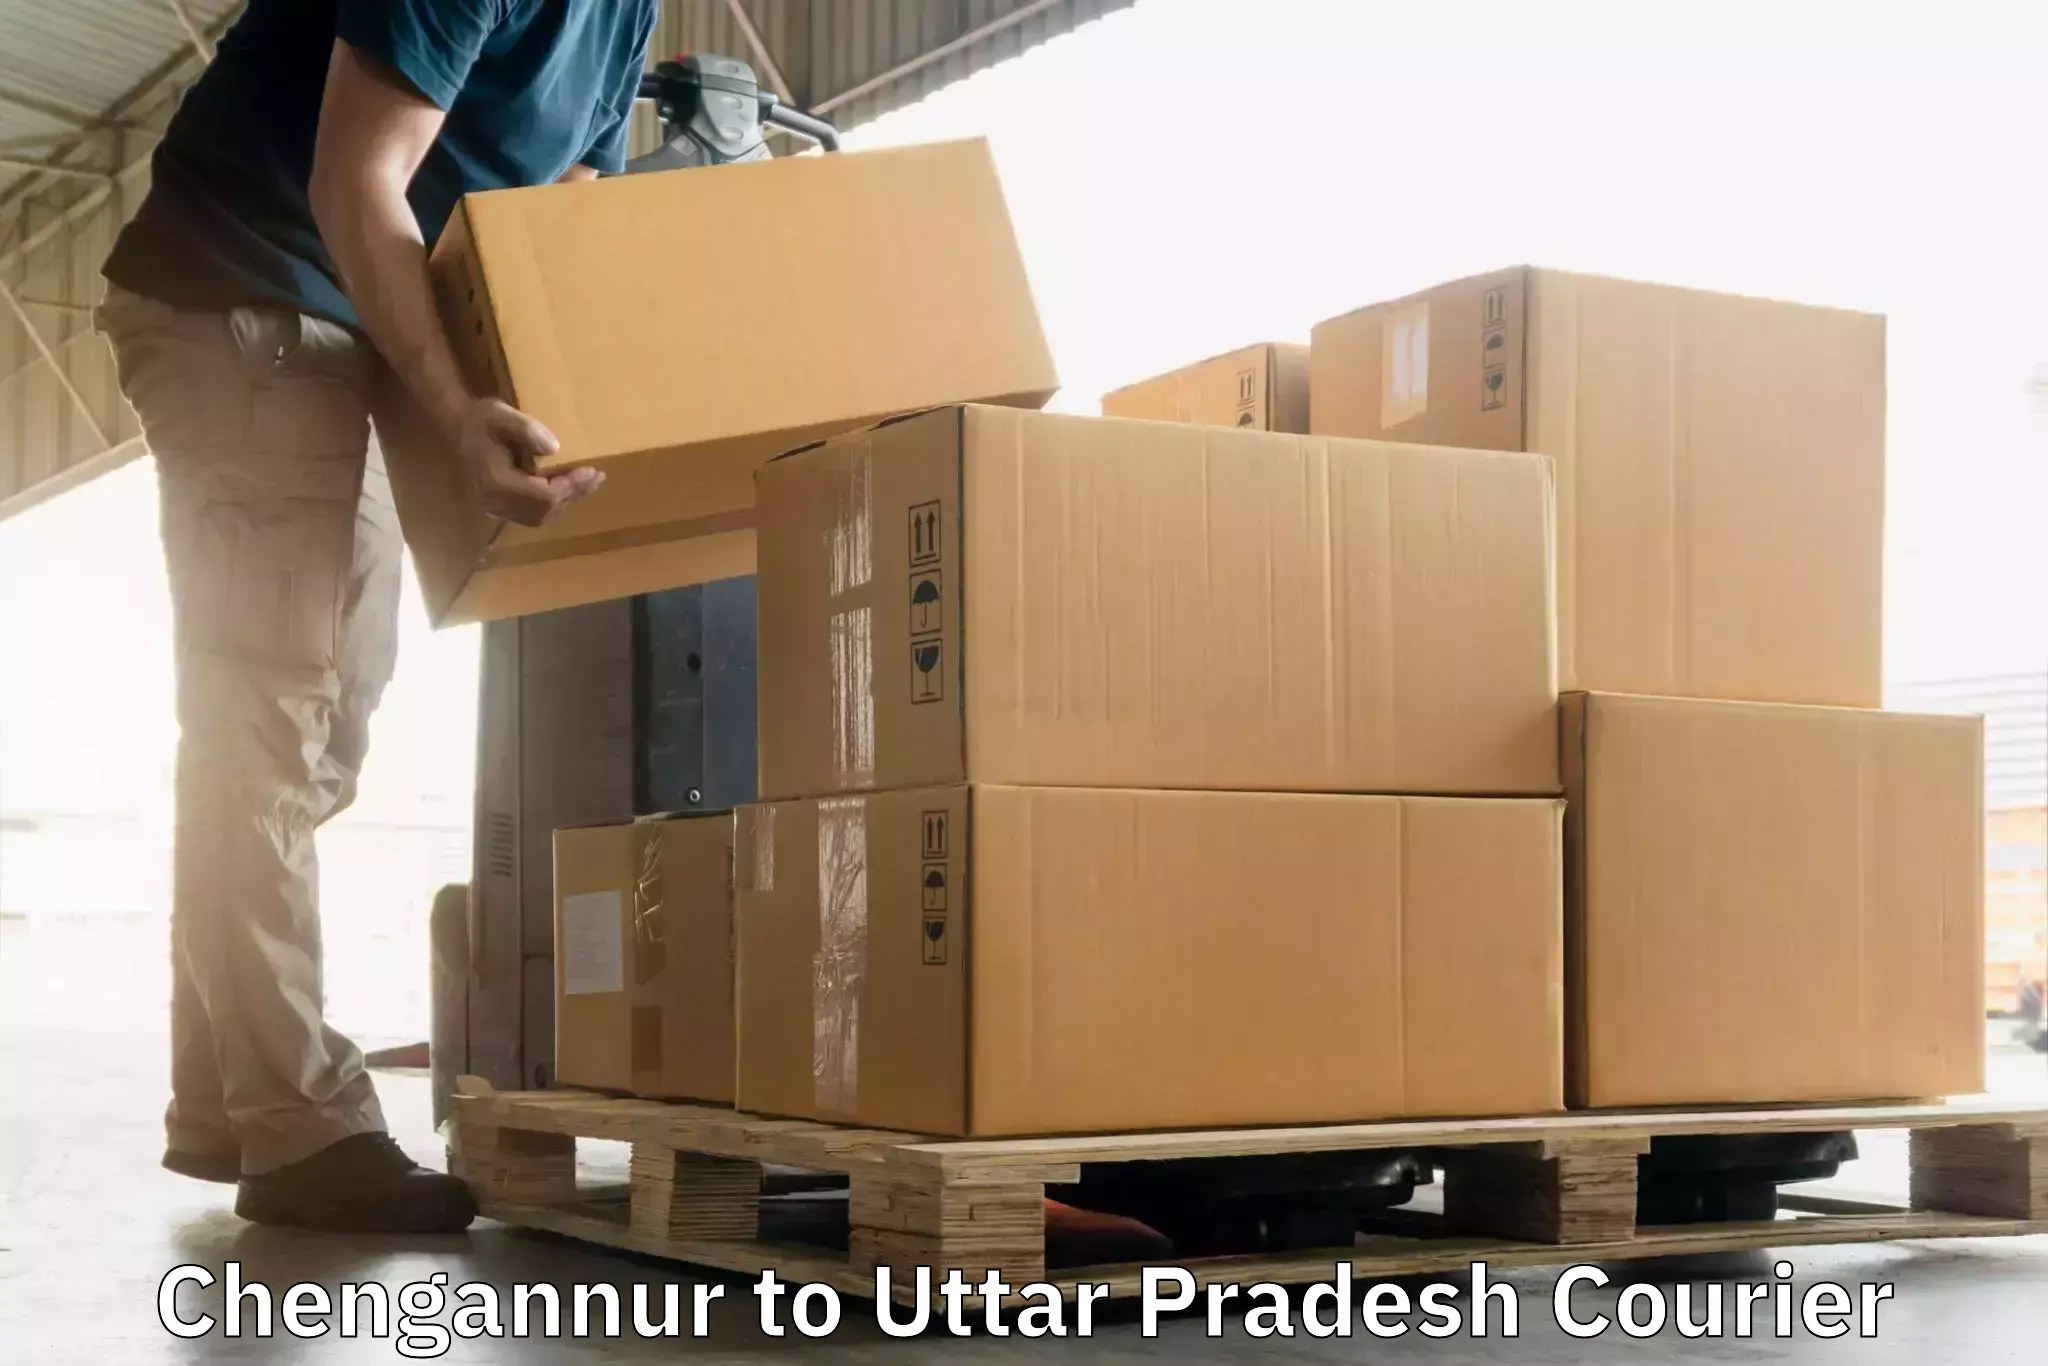 Courier service partnerships Chengannur to Orai